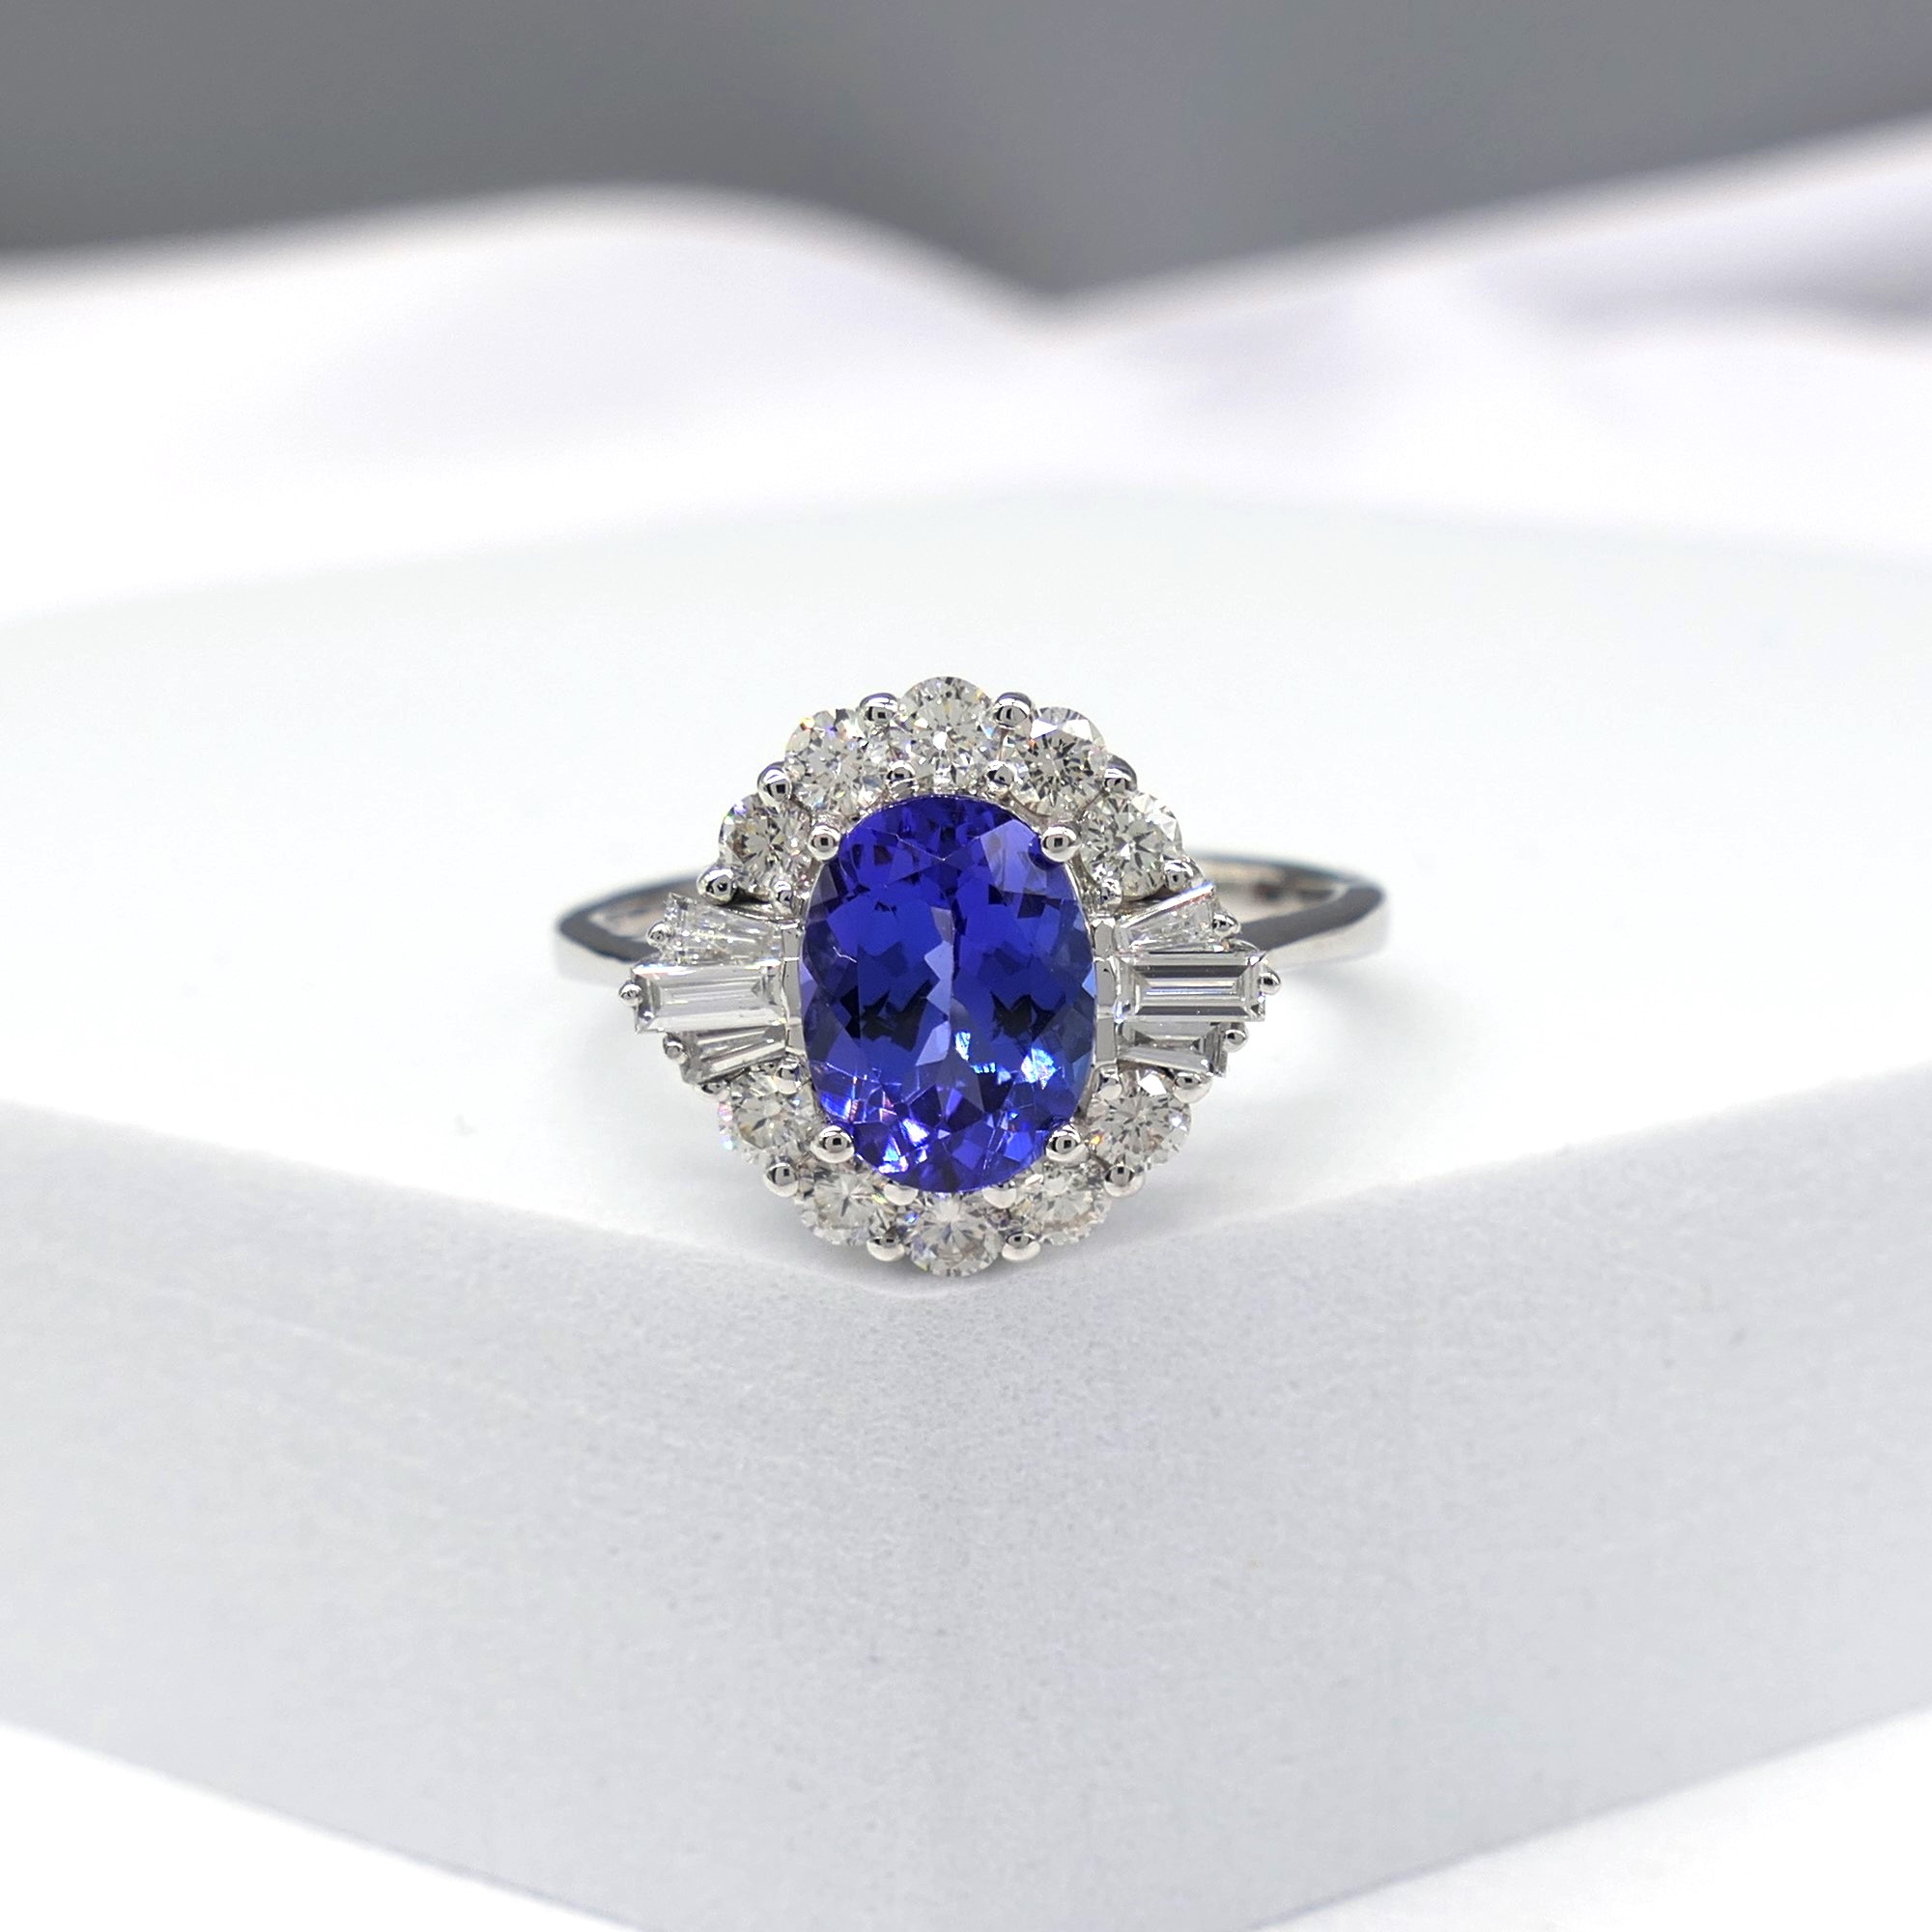 Stylish 1.37 Carat Tanzanite and 0.57 Carat Diamond Cluster Ring In 18ct White Gold - Image 7 of 7